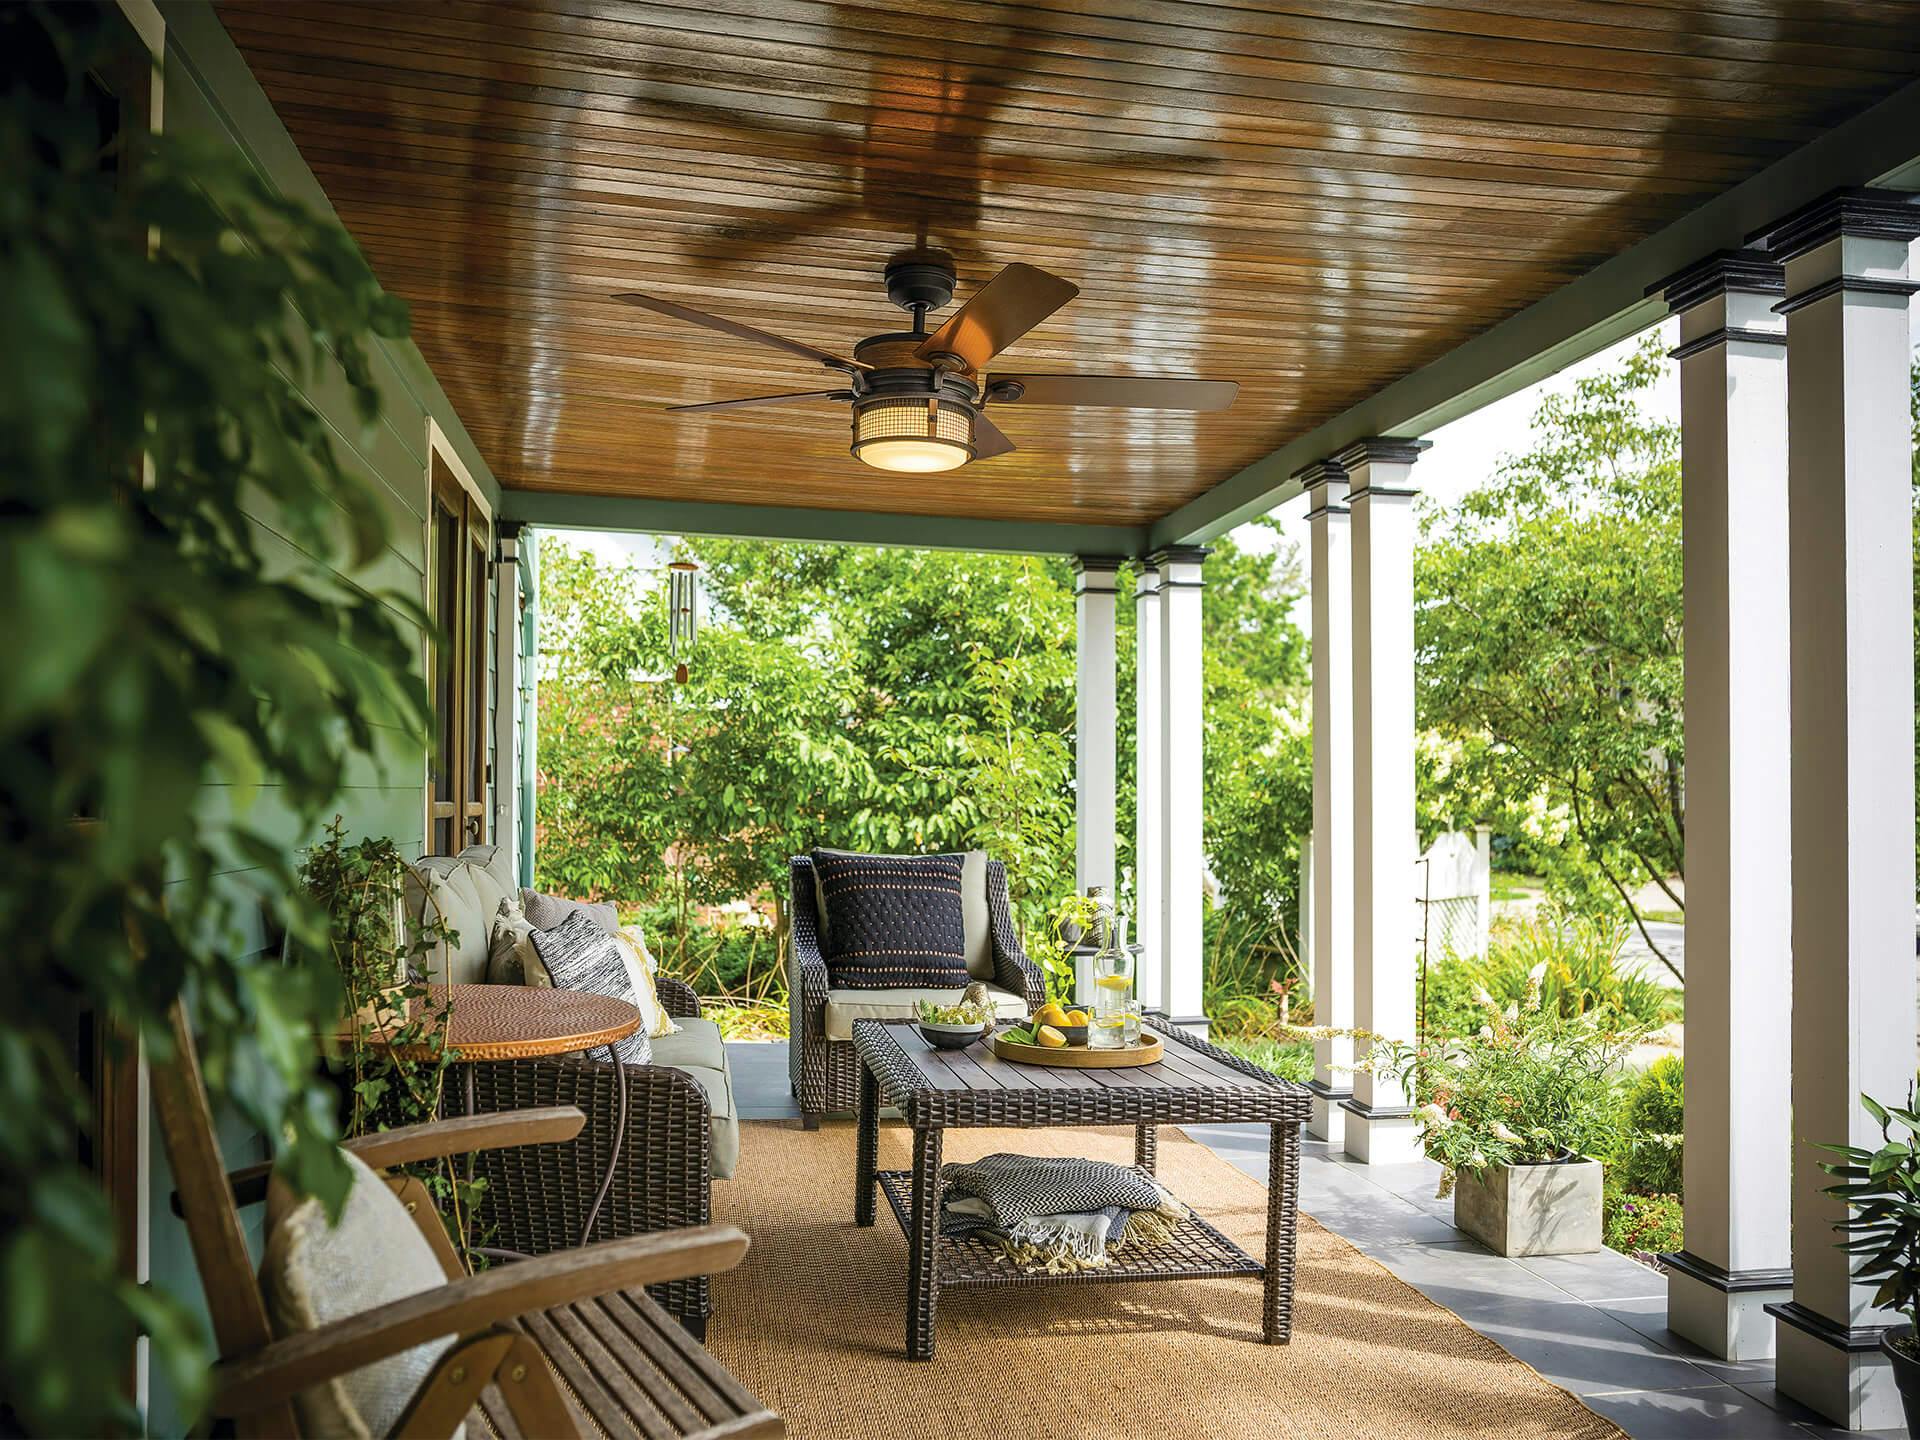 Ahrendale Outdoor Ceiling Fan in patio with lush greenery